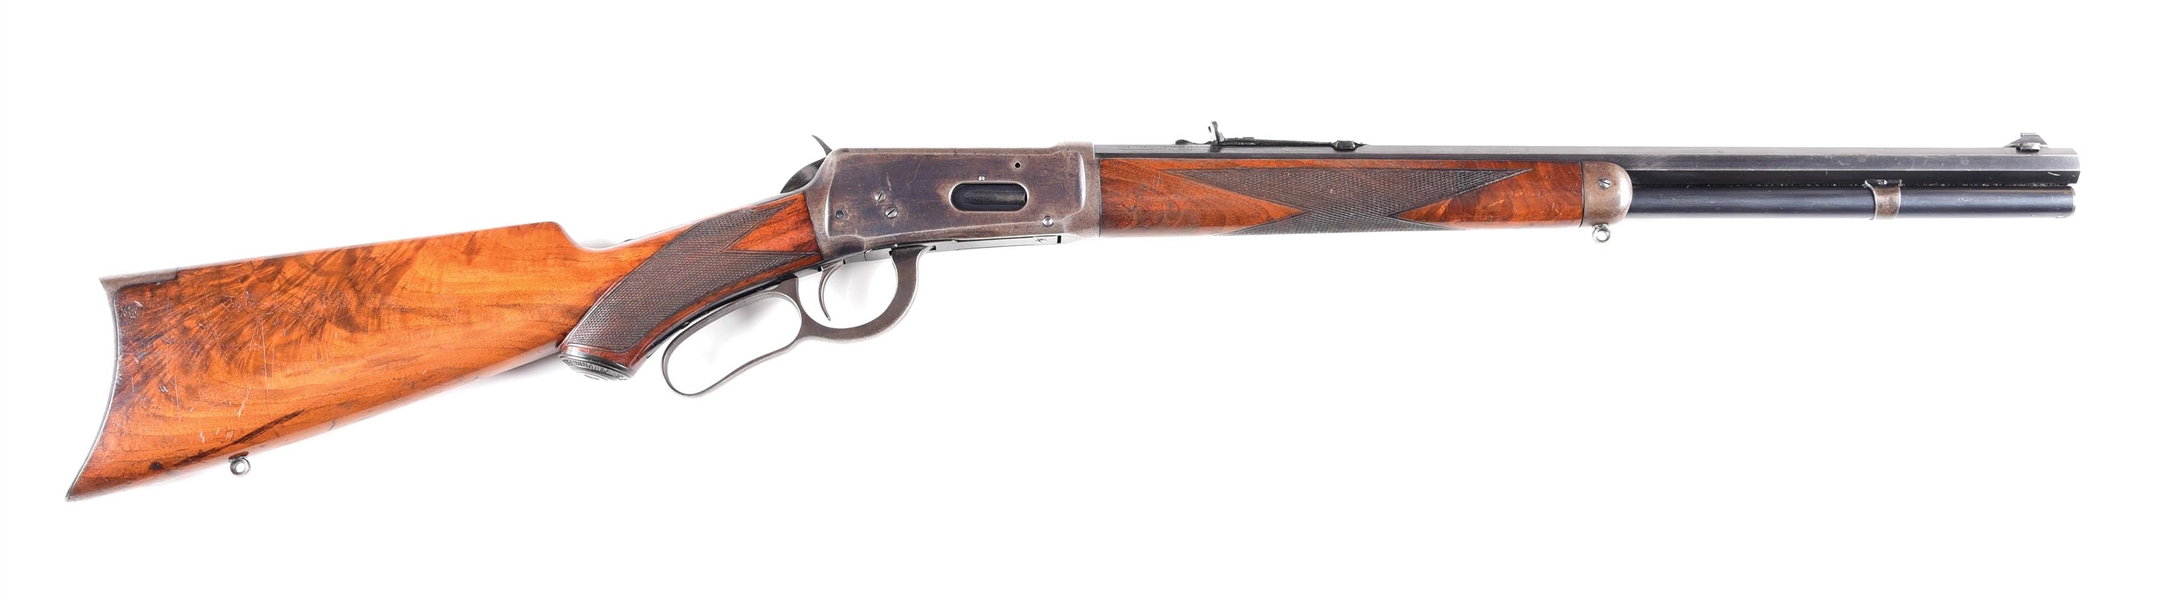 (C) RARE DOCUMENTED "TEXAS SPECIAL" WINCHESTER MODEL 1894 DELUXE SHORT RIFLE.